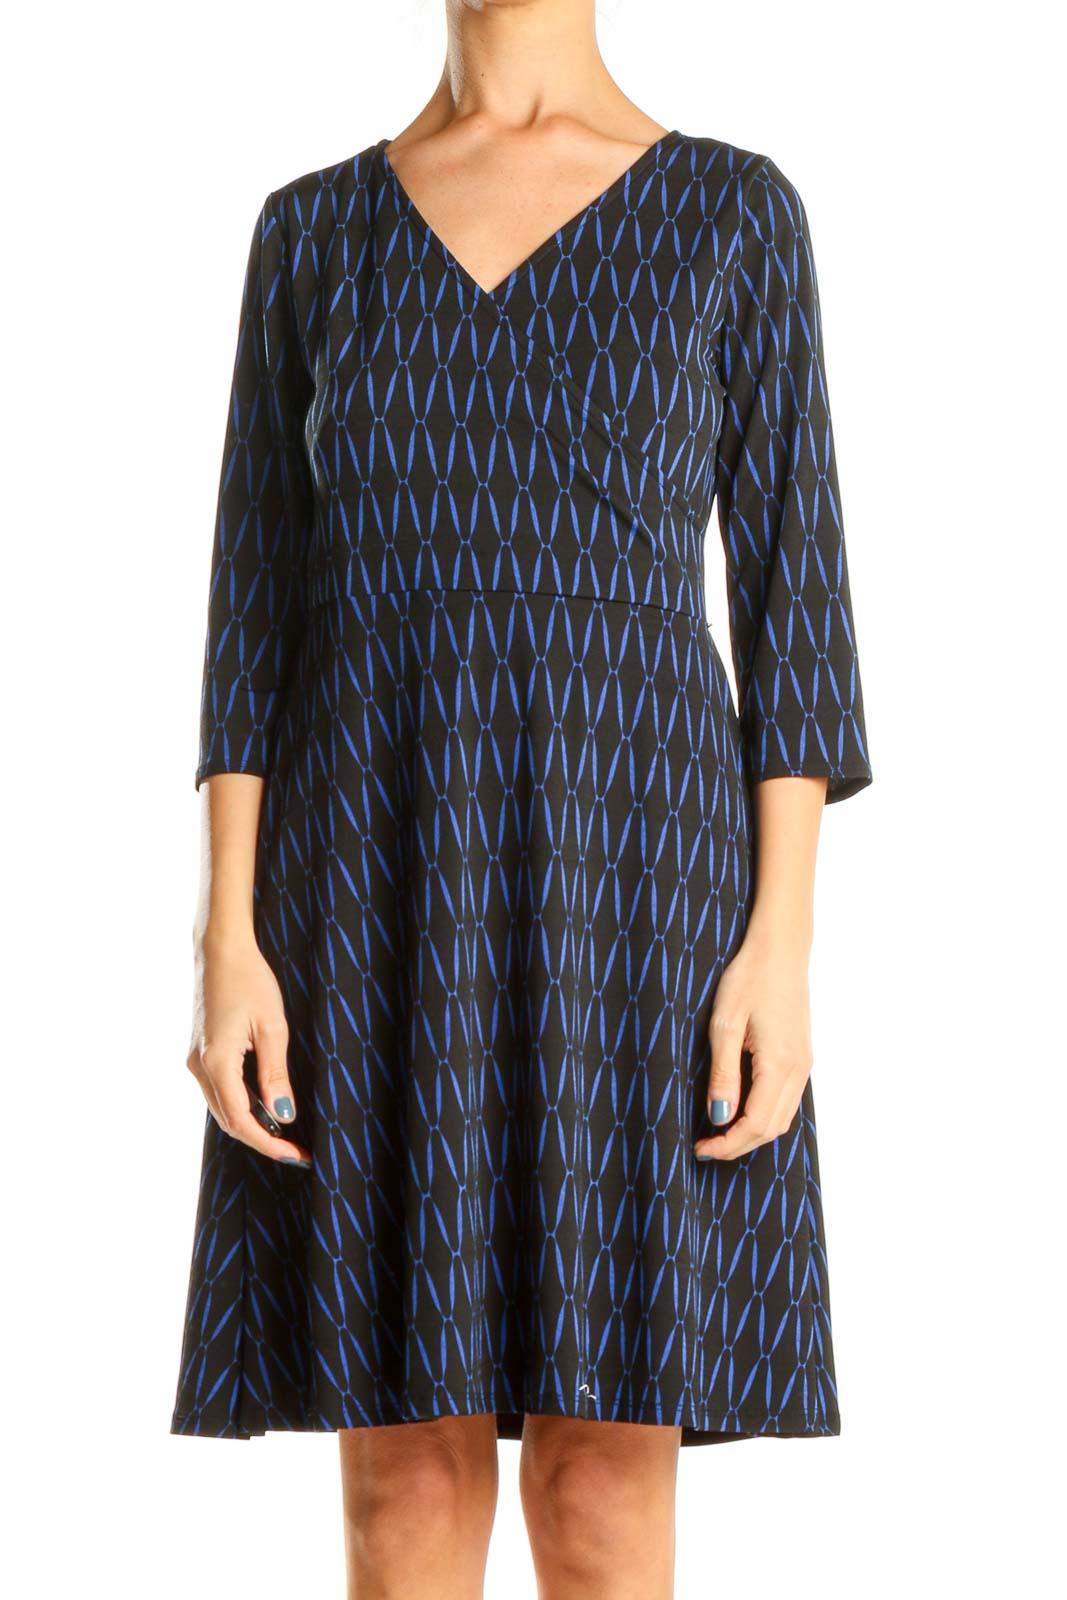 Black Blue Printed Chic Fit & Flare Dress Front